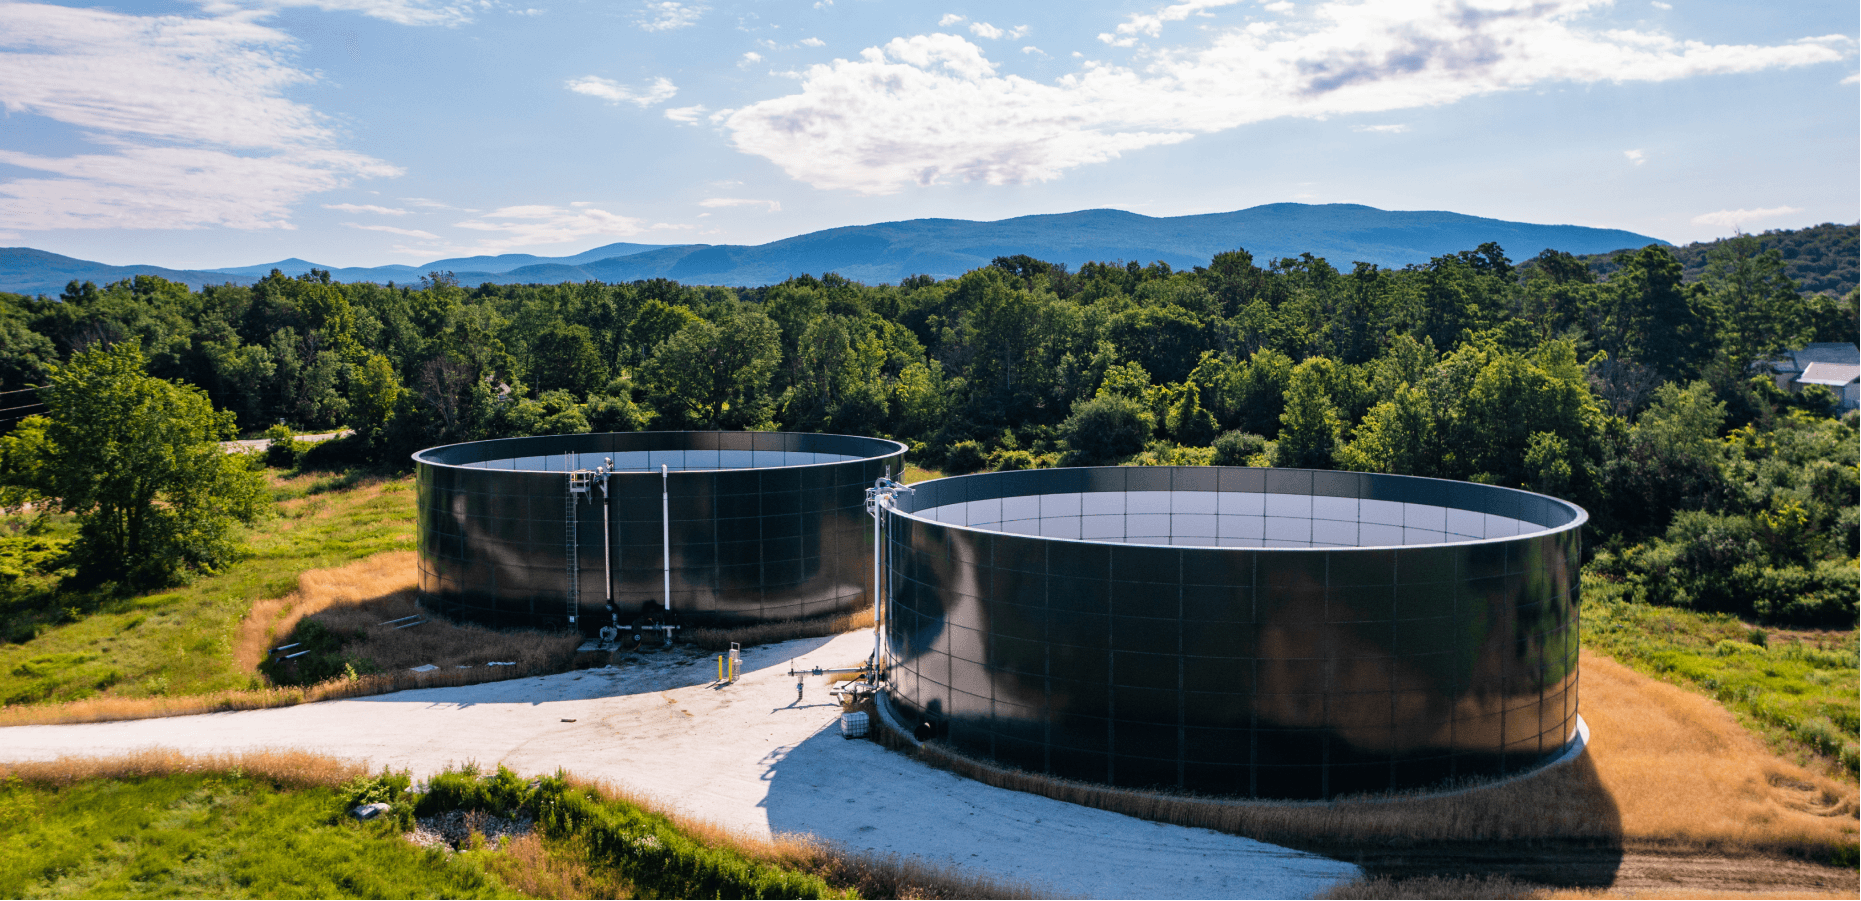 Liquid digestate tank holding sustainable fertilizer from farm powered anaerobic digestion